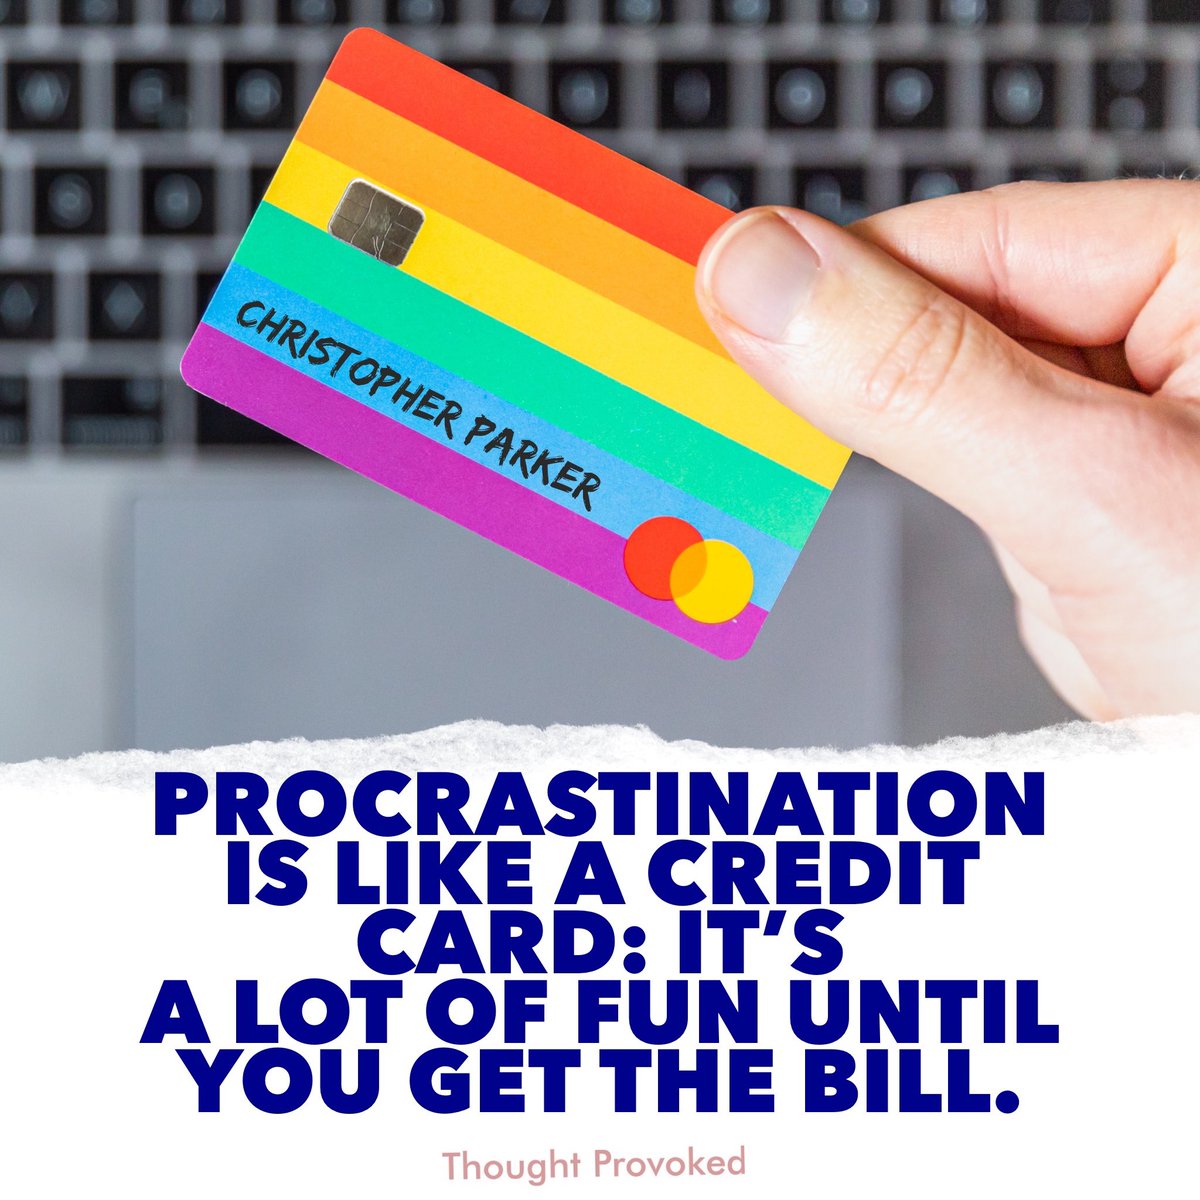 Procrastination is like a credit card, it's a lot of fun until you get the bill.
#quote
#IQRTG